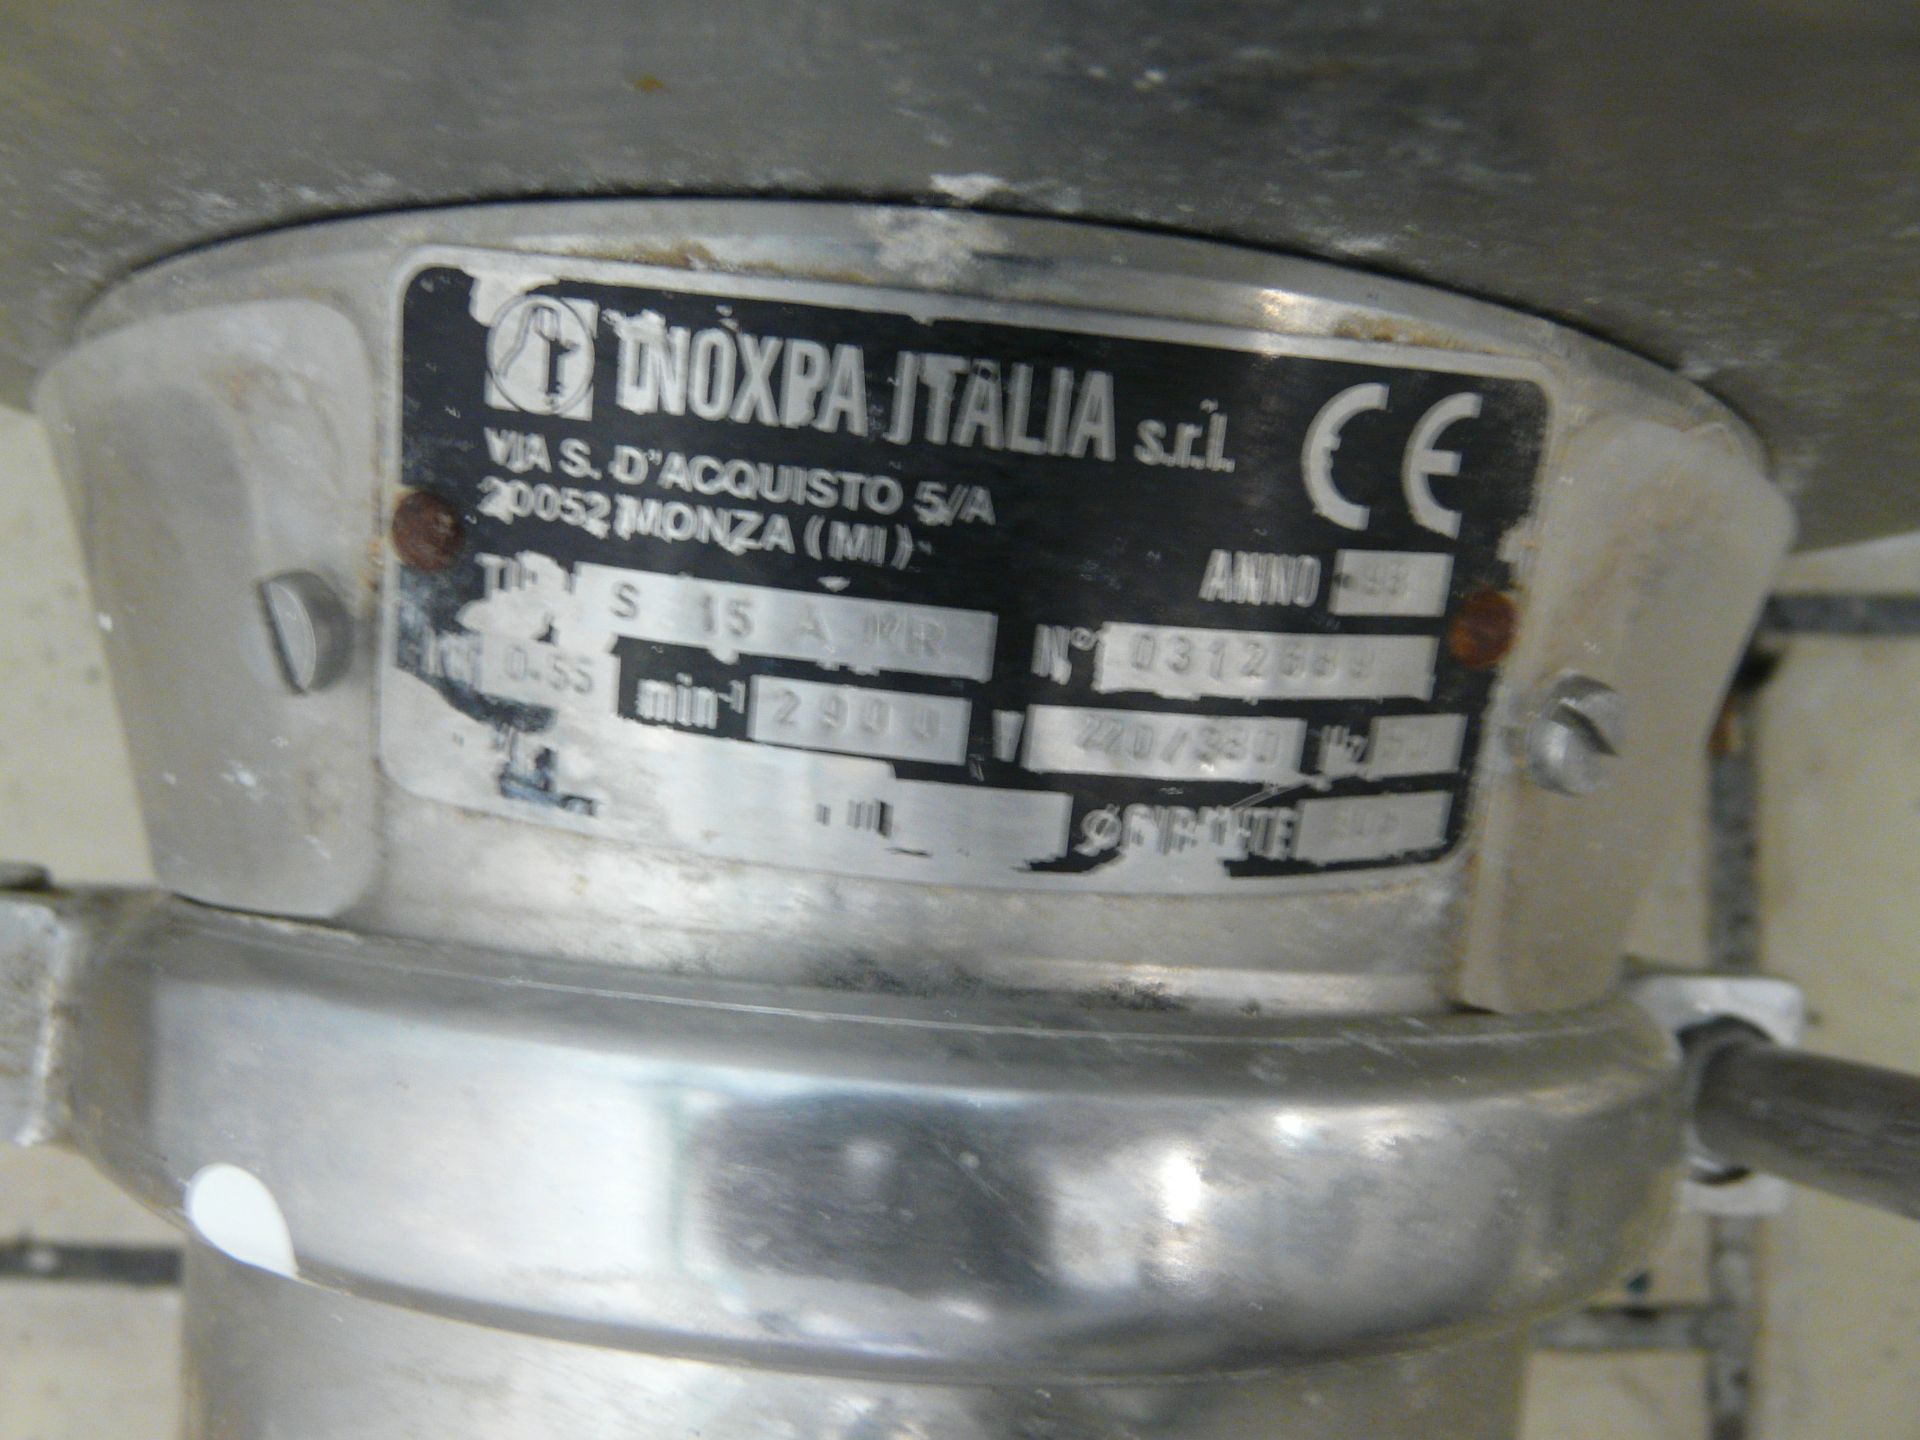 INOXPA stainless steel Pump - Image 3 of 3